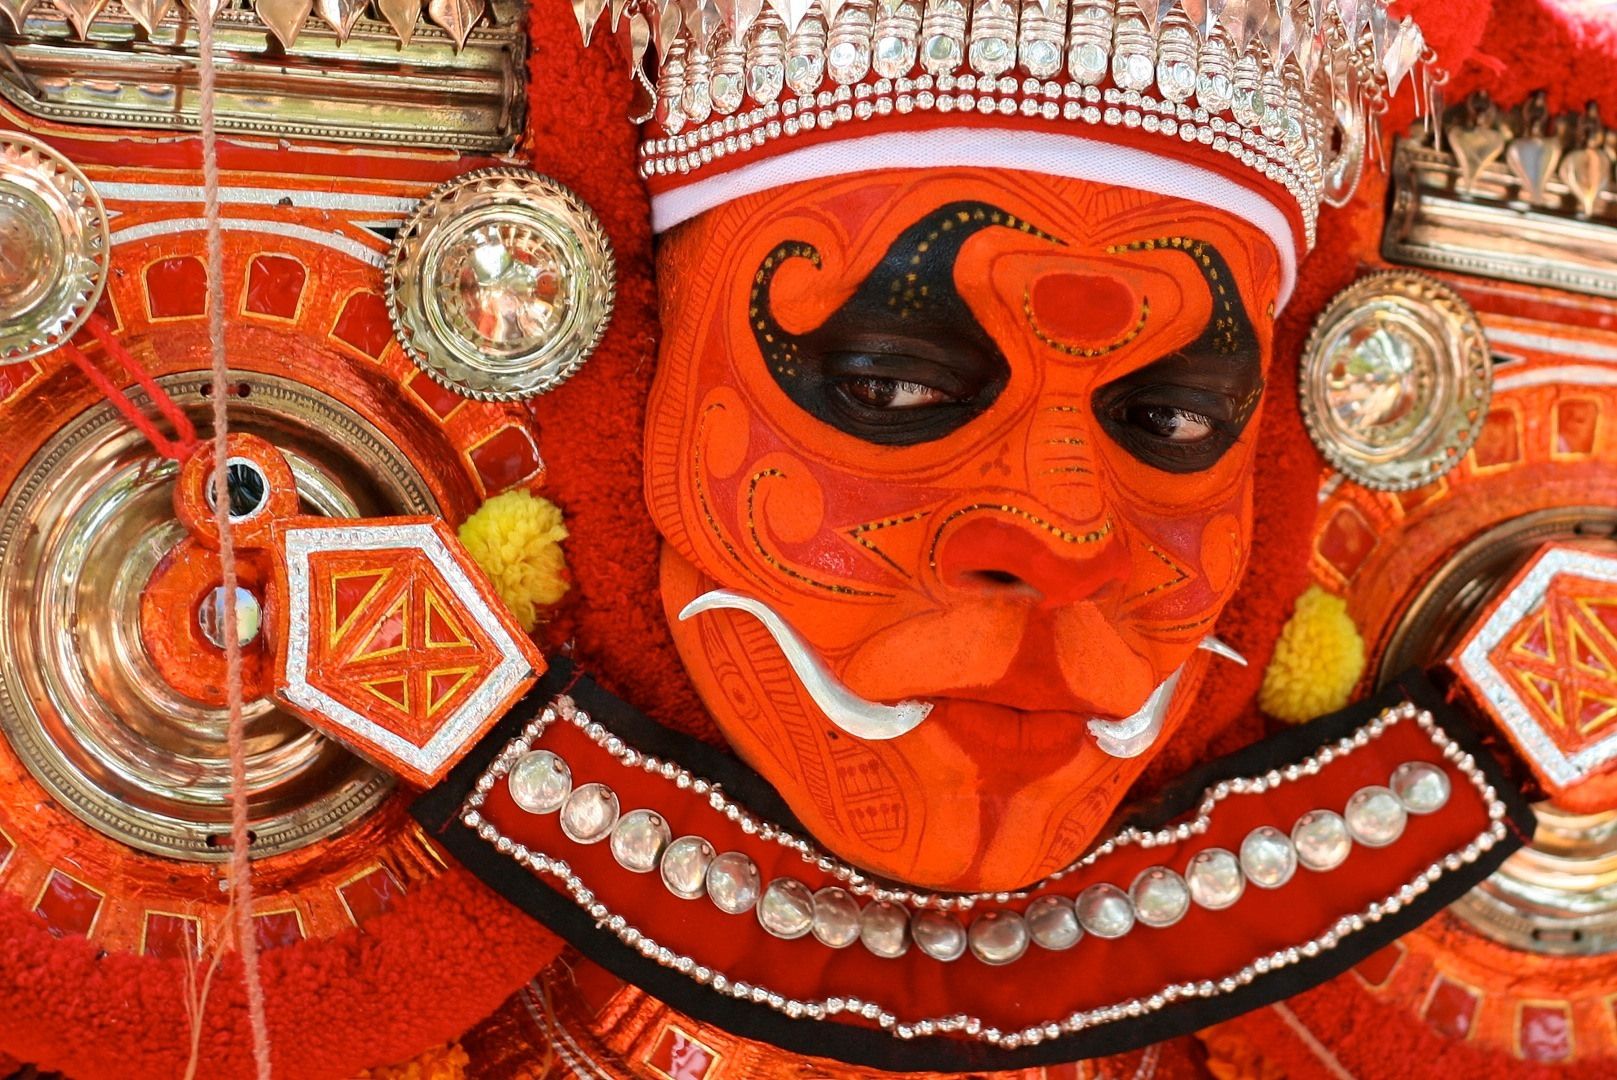 Theyyam- The ritual dance form showcasing the faith in divine